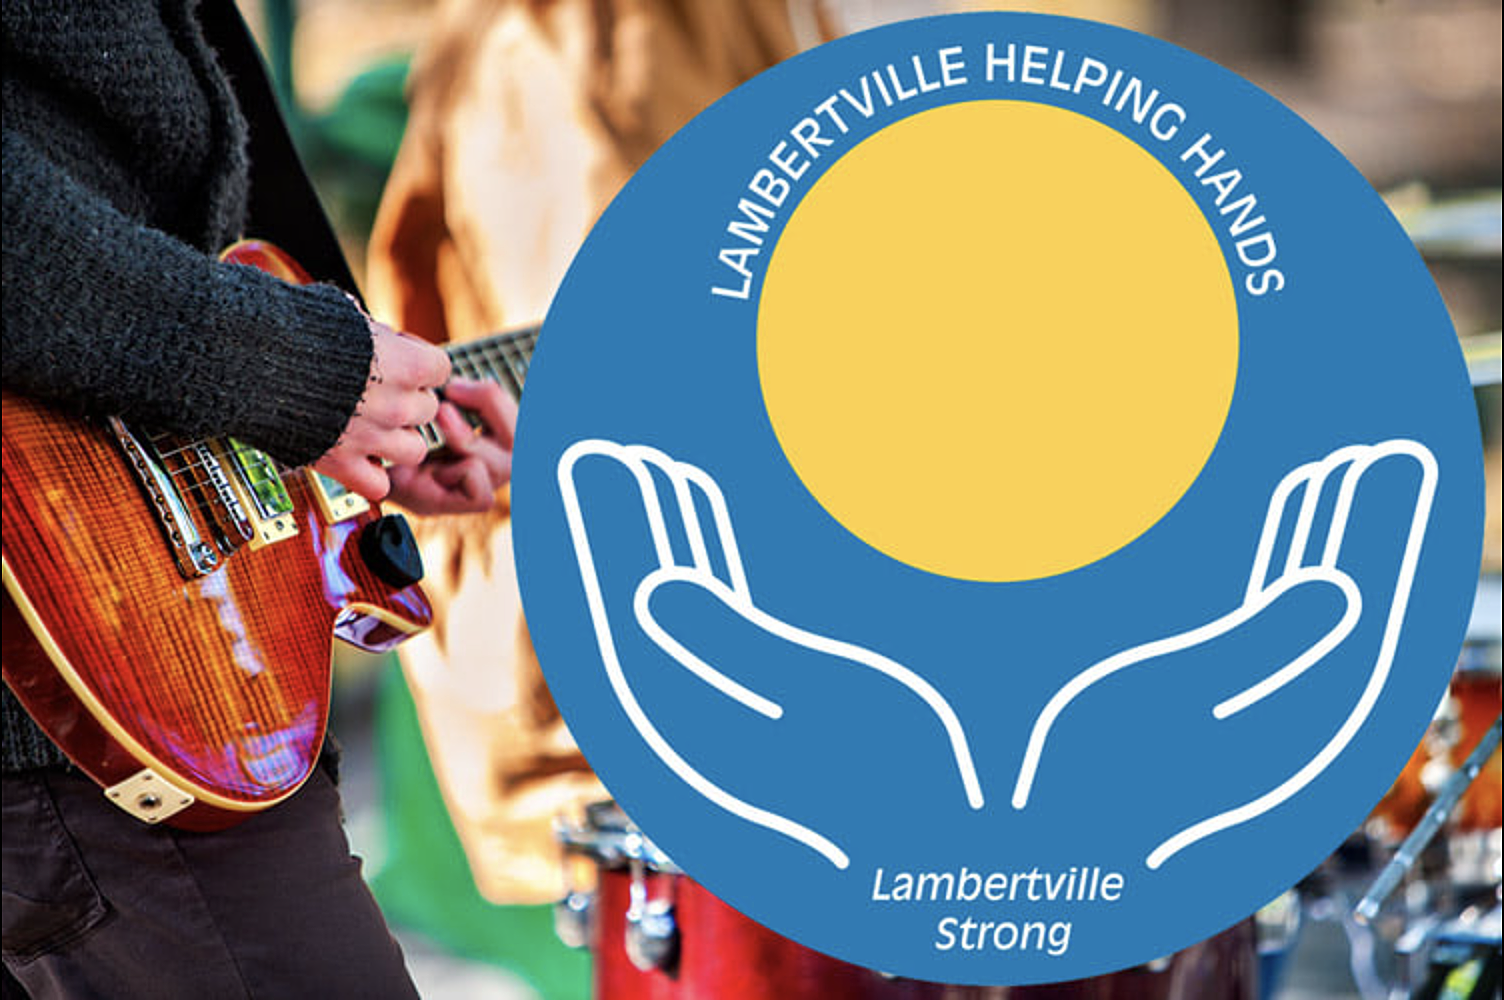 Lambertville is Hosting a Benefit Concert for Hurricane Victims pic